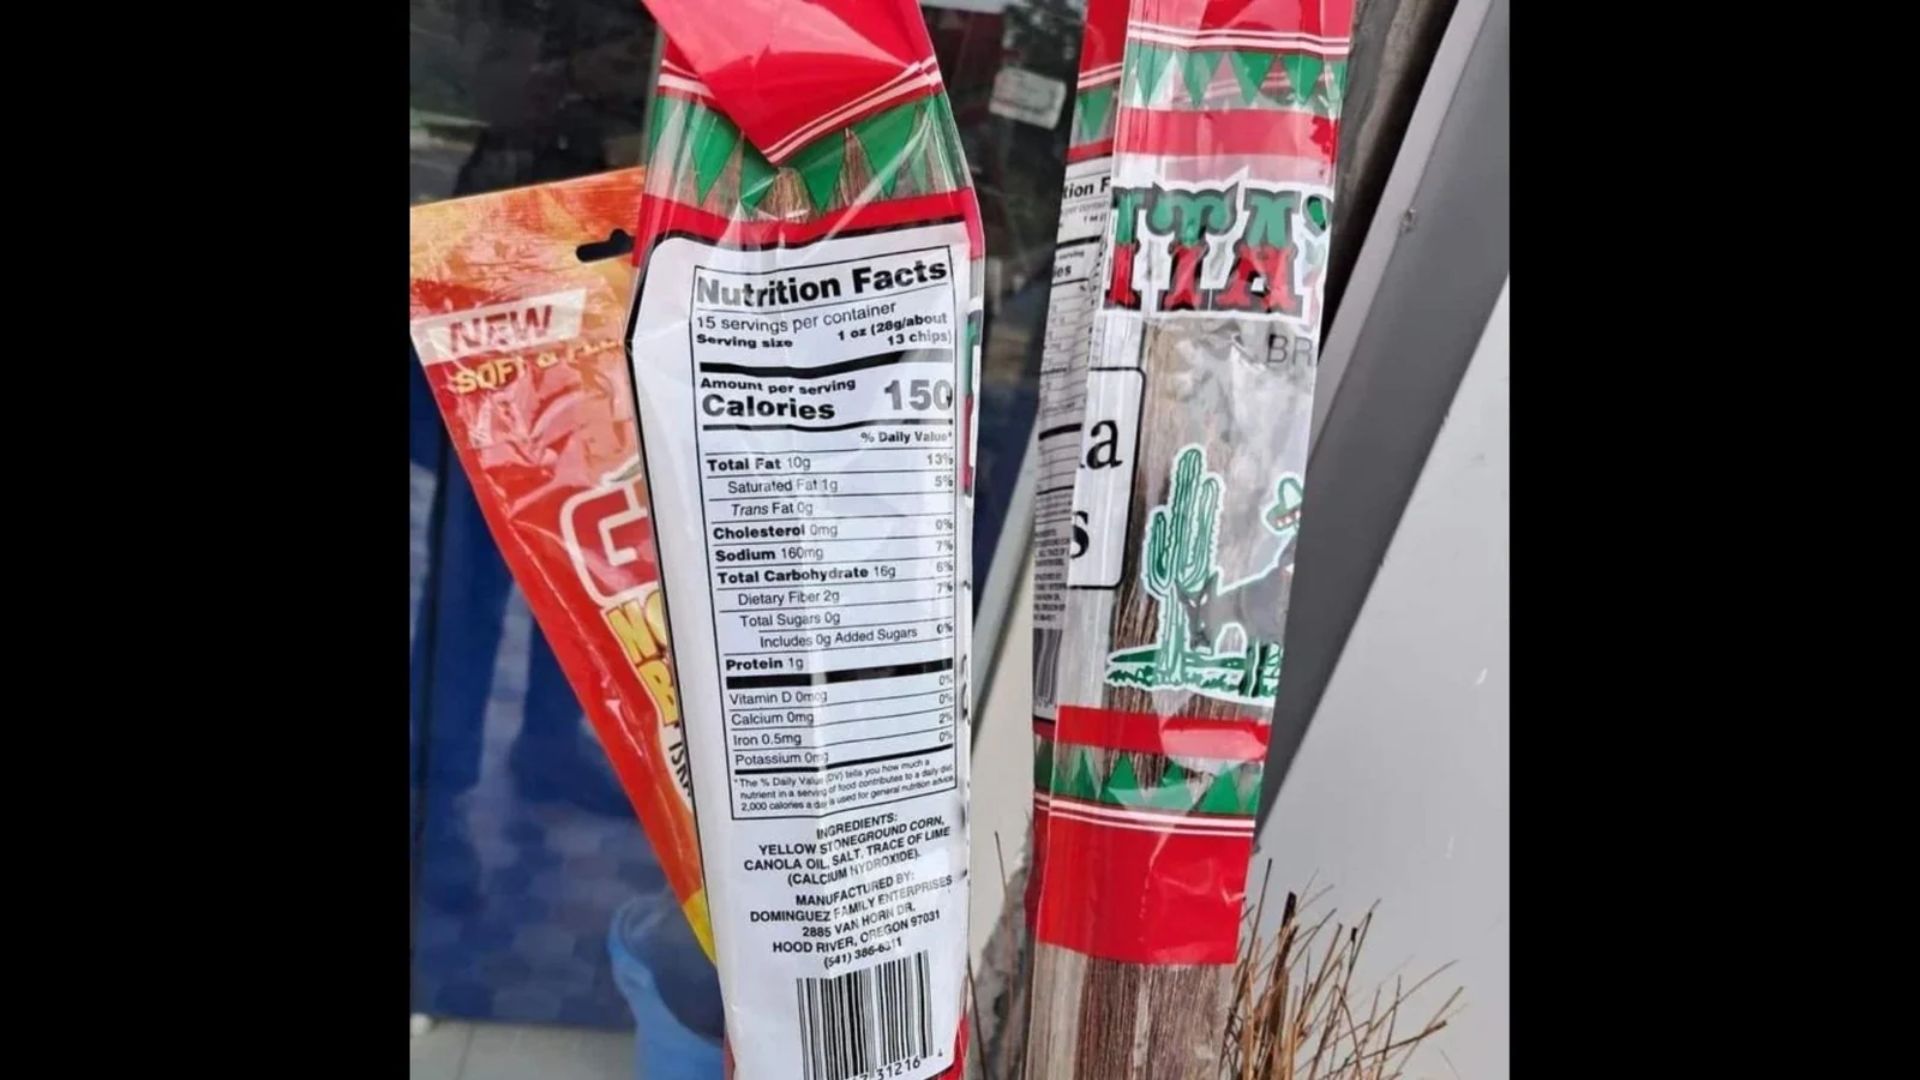 Indian Broom with ‘Nutrition Facts’ Claims to ‘Burn 150 Calories per Sweep’ | Video Goes Viral